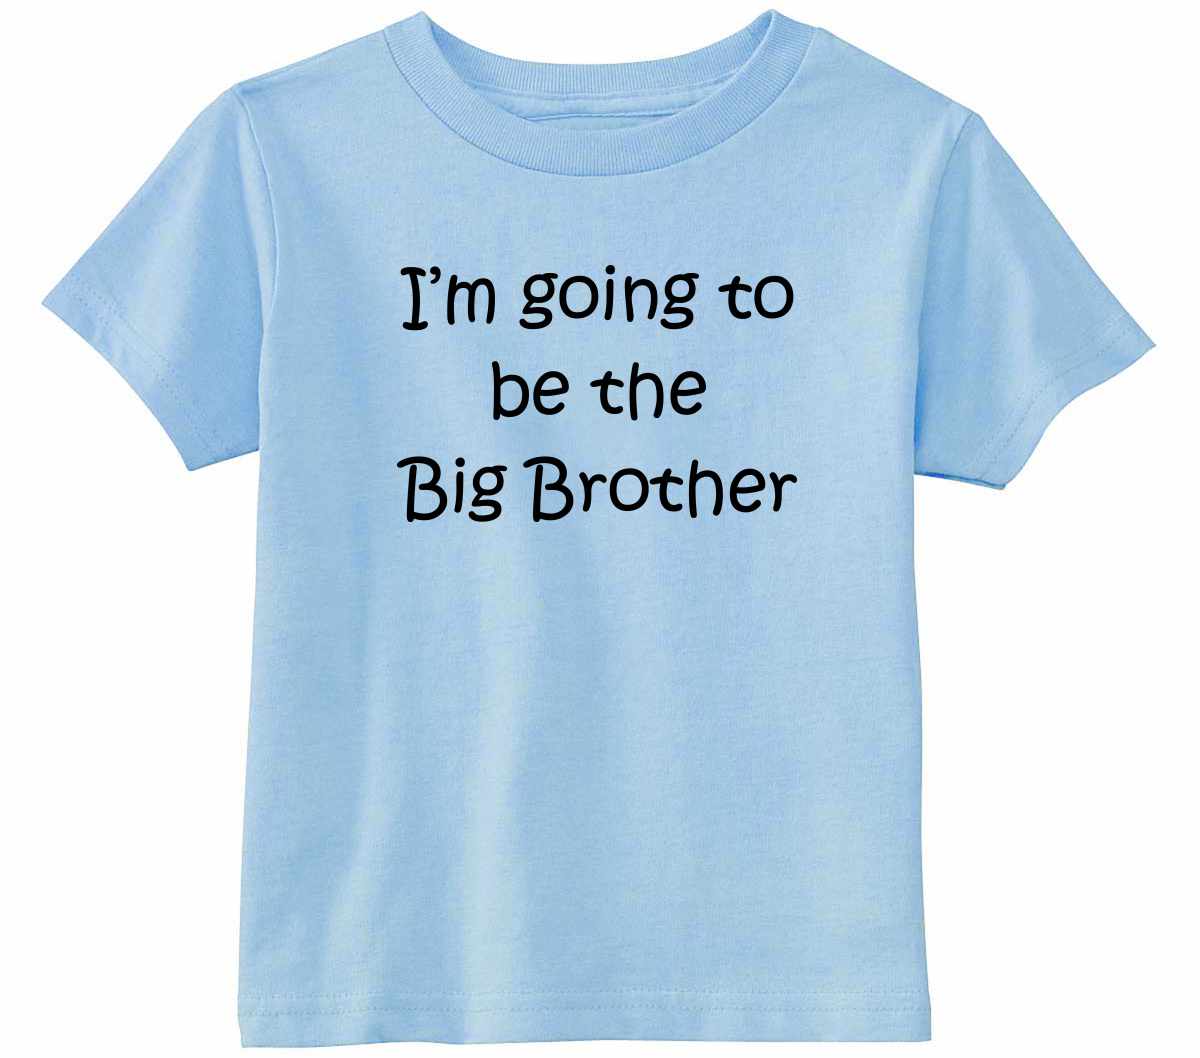 I'M GOING TO BE THE BIG BROTHER Infant/Toddler  (#518-7)